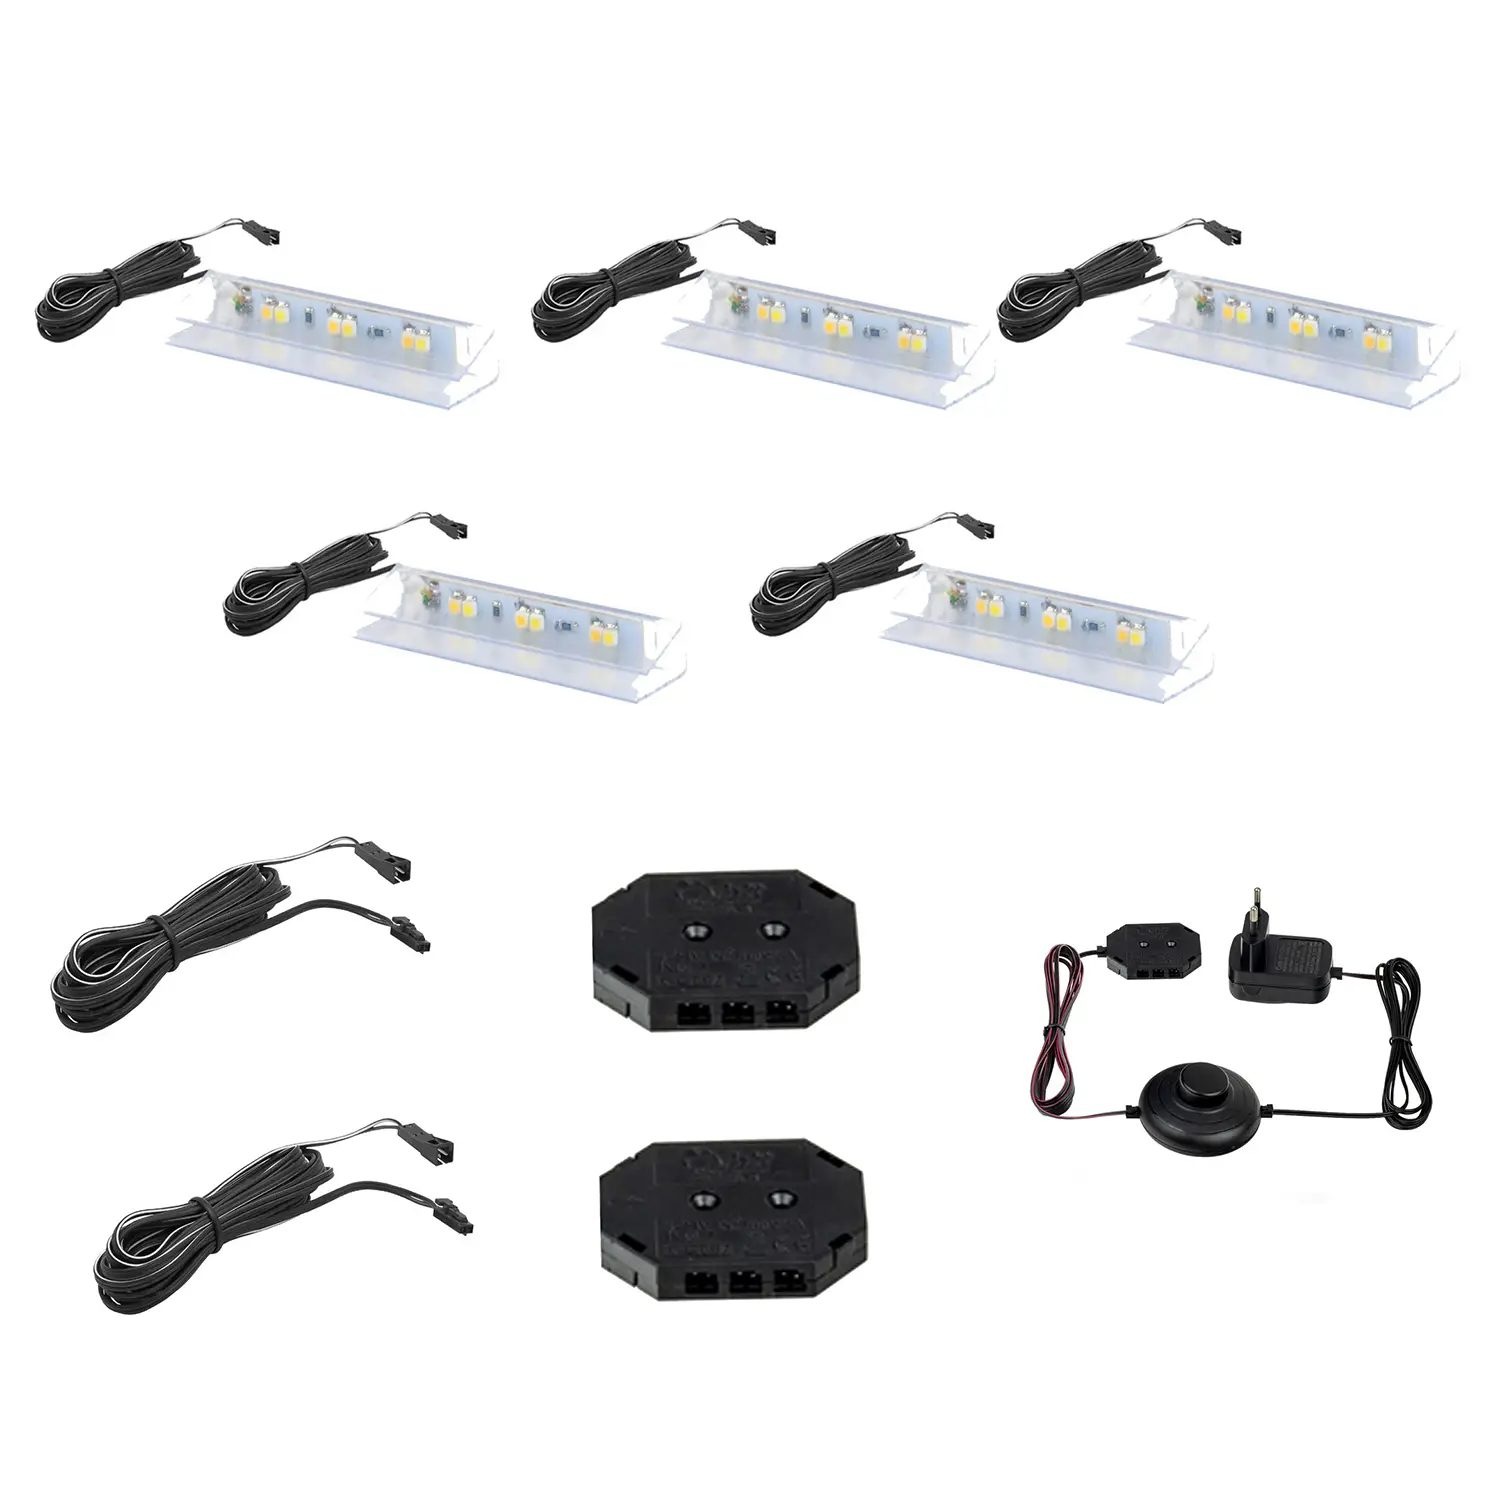 5-teilig LED-Beleuchtung Duo